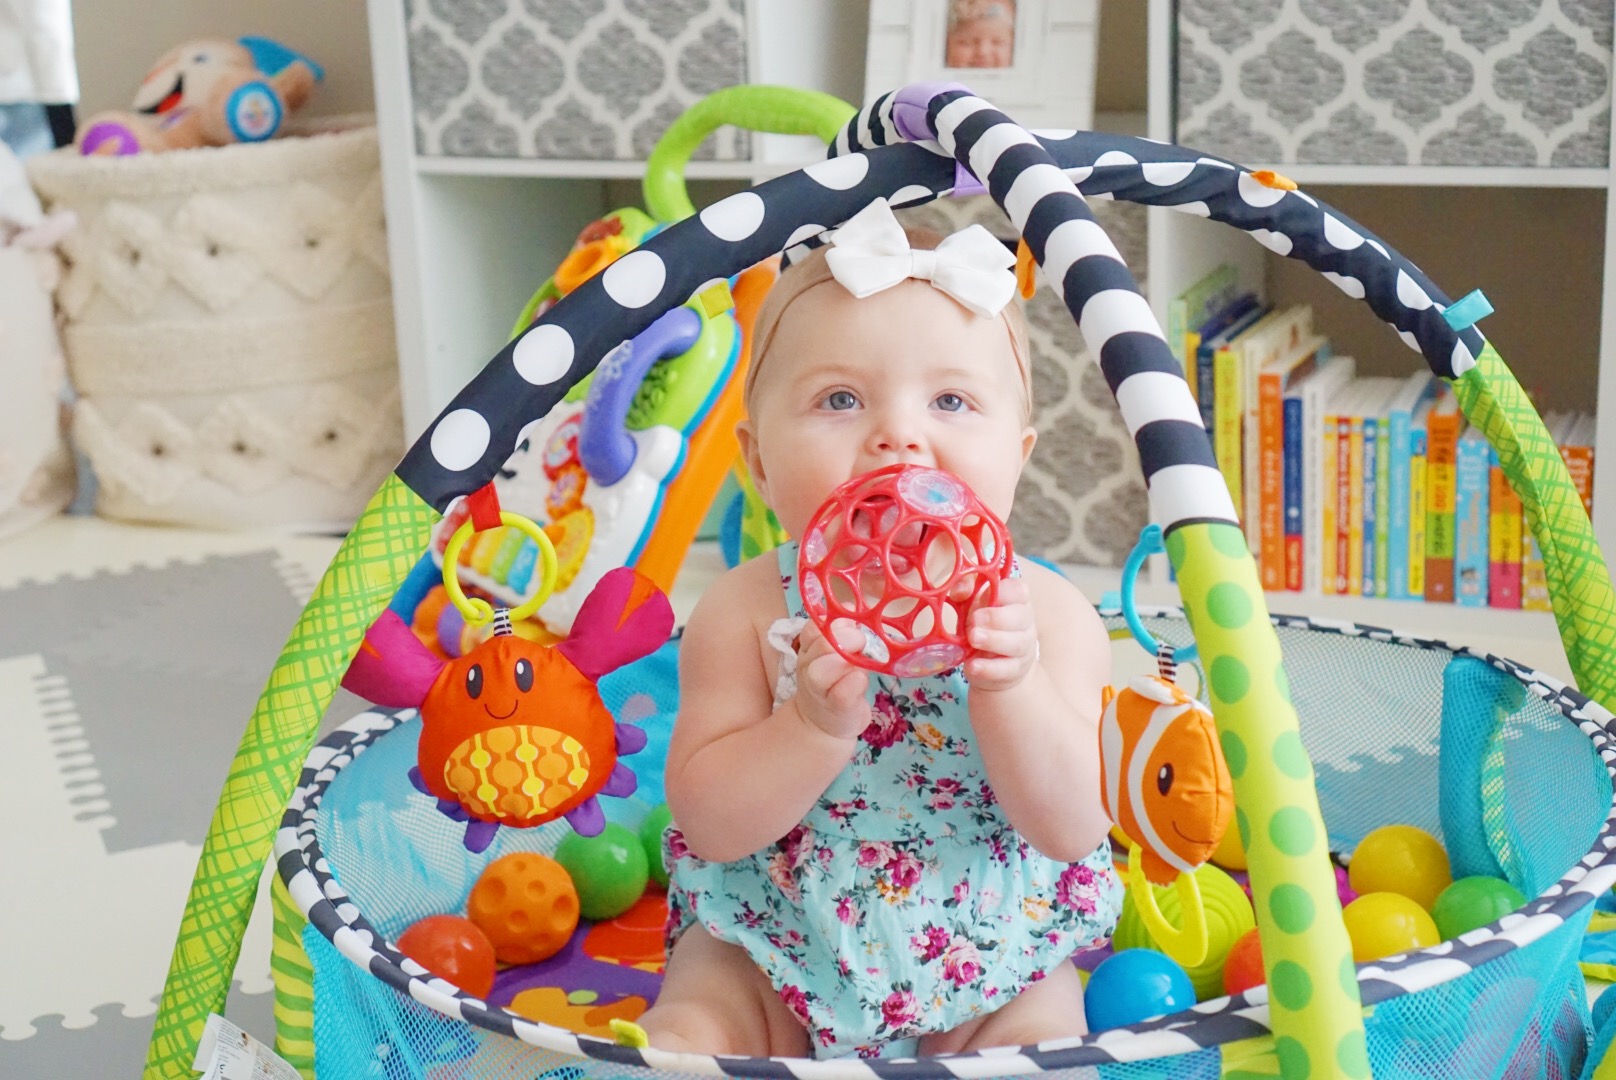 Katelyn Jones A Touch of Pink buybuy BABY Infantino Activity Gym